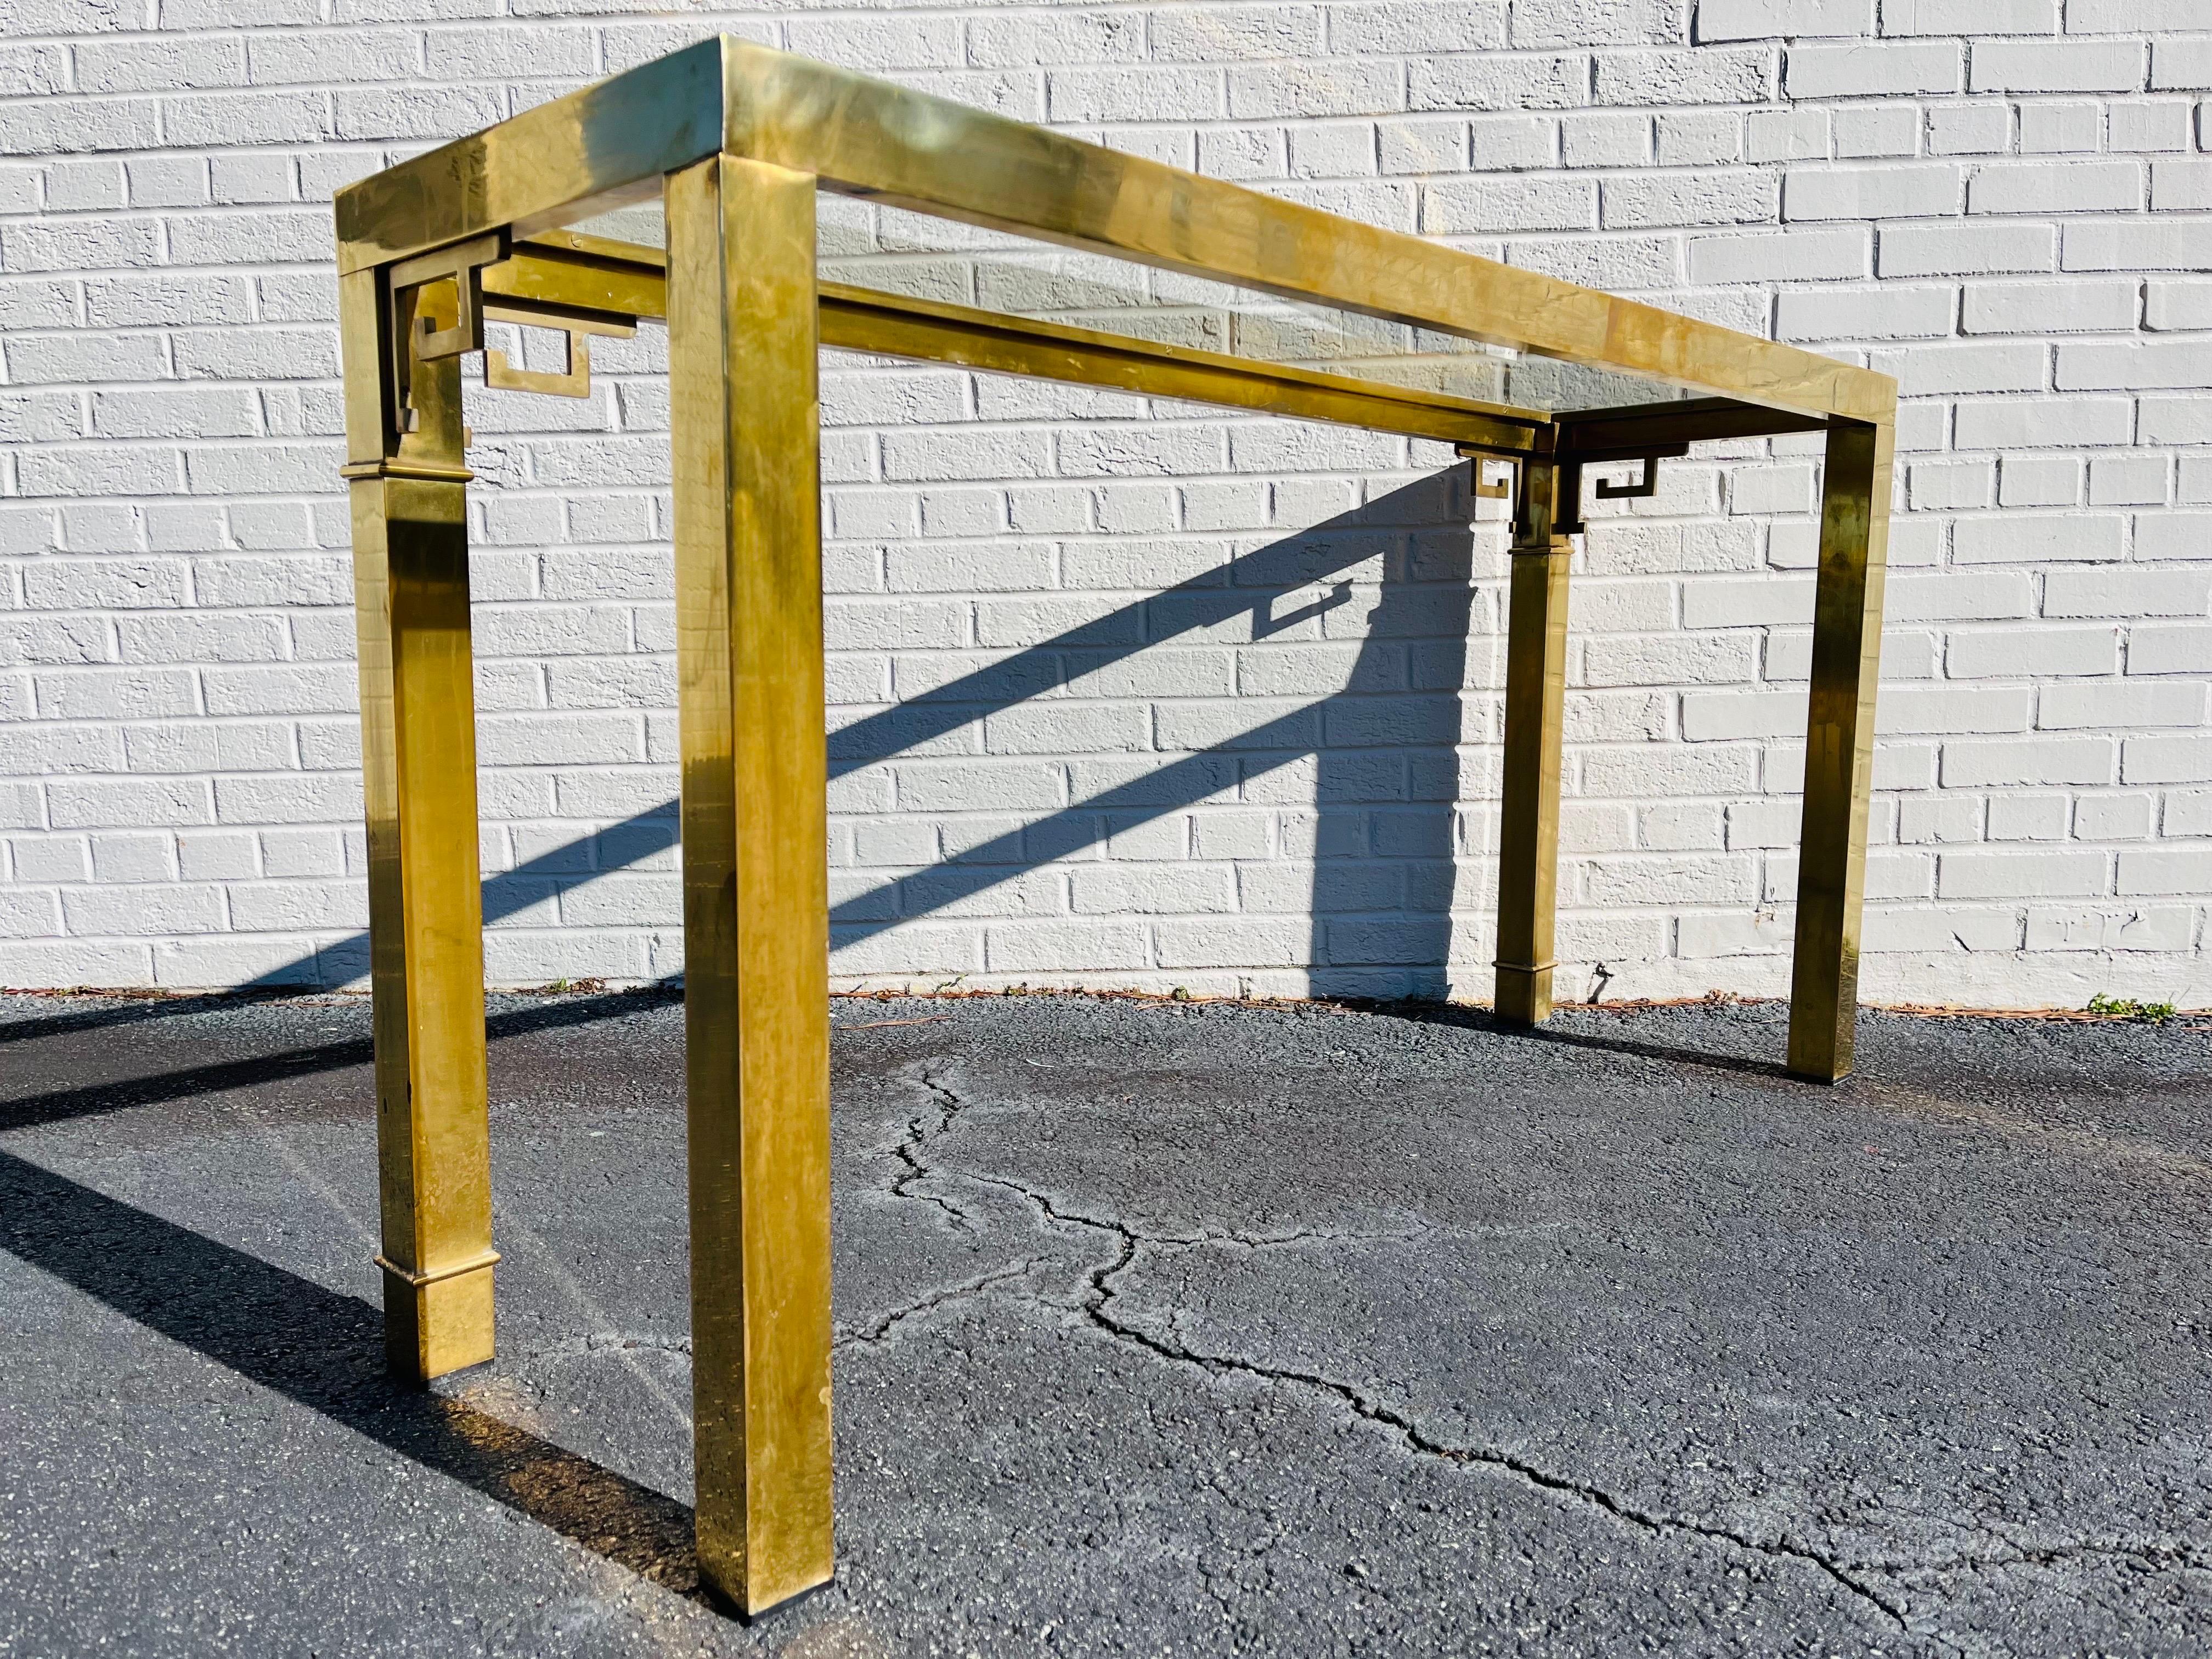 A vintage, 1970's era beautiful brass and glass console table by Mastercraft. The sofa or hall table features banding around the legs as well as Greek Key designs in the front and side corners. The heavyweight brass and strong lines are in perfect